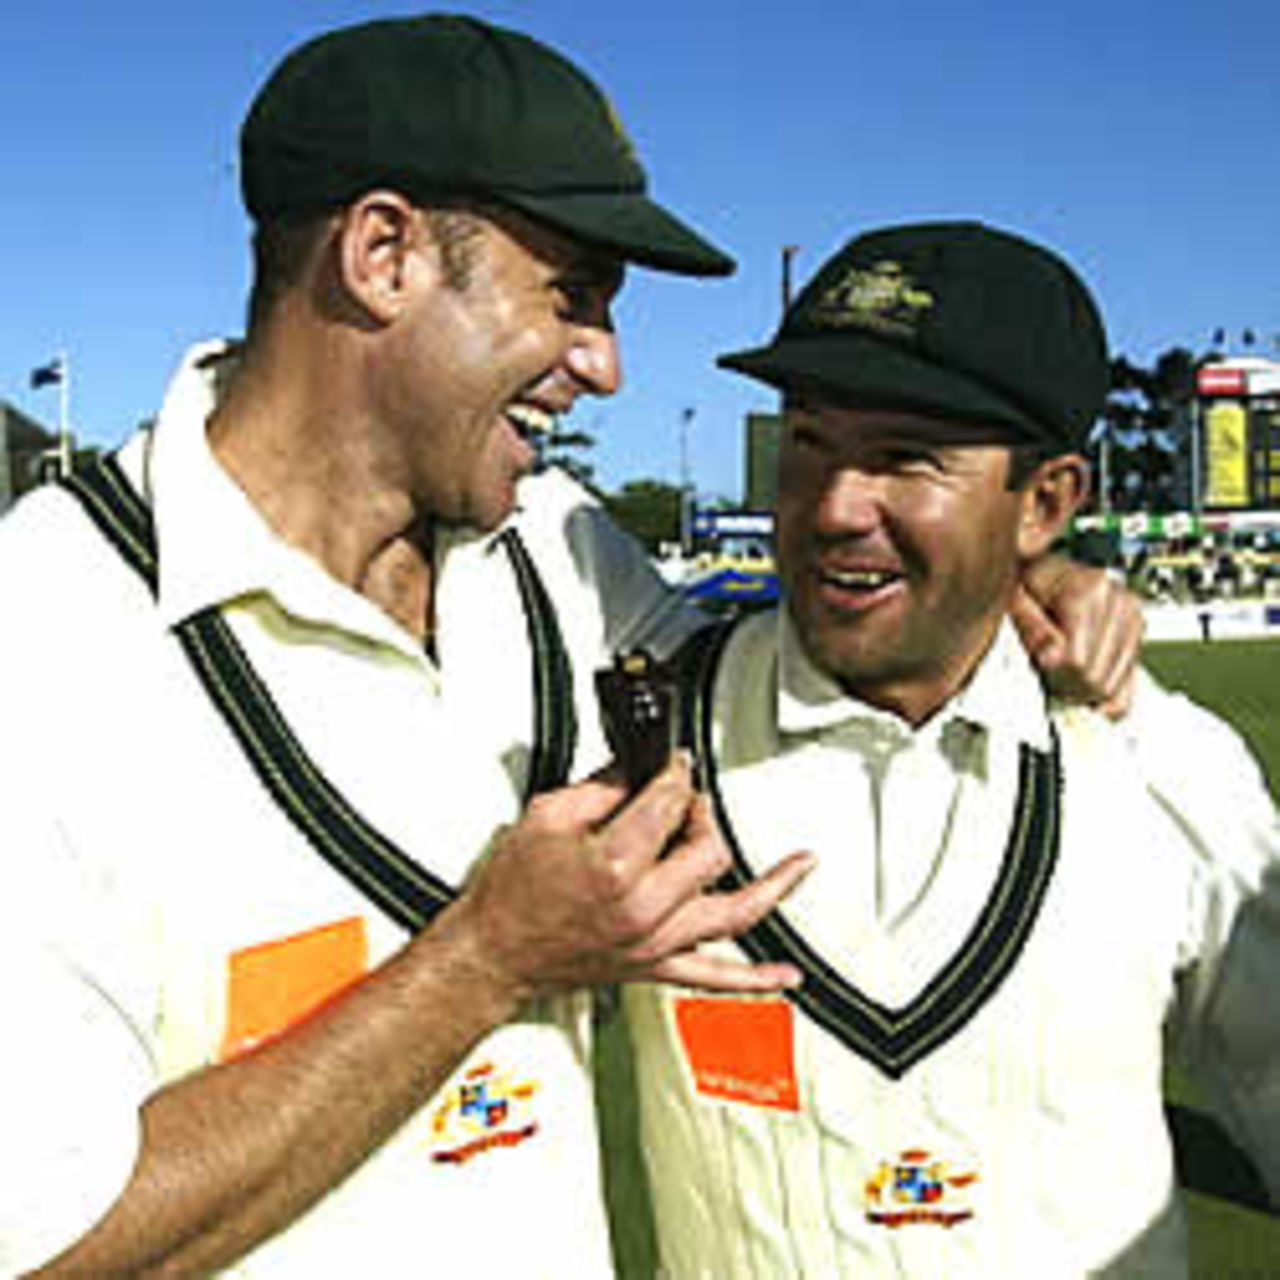 PERTH - DECEMBER 1: Matthew Hayden and Ricky Ponting of Australia celebrate with a replica urn during the third day of the third Ashes Test between Australia and England at the WACA in Perth, Australia on December 1, 2002. Australia won the match and retain the Ashes by taking an unbeatable 3 - 0 lead in the series.